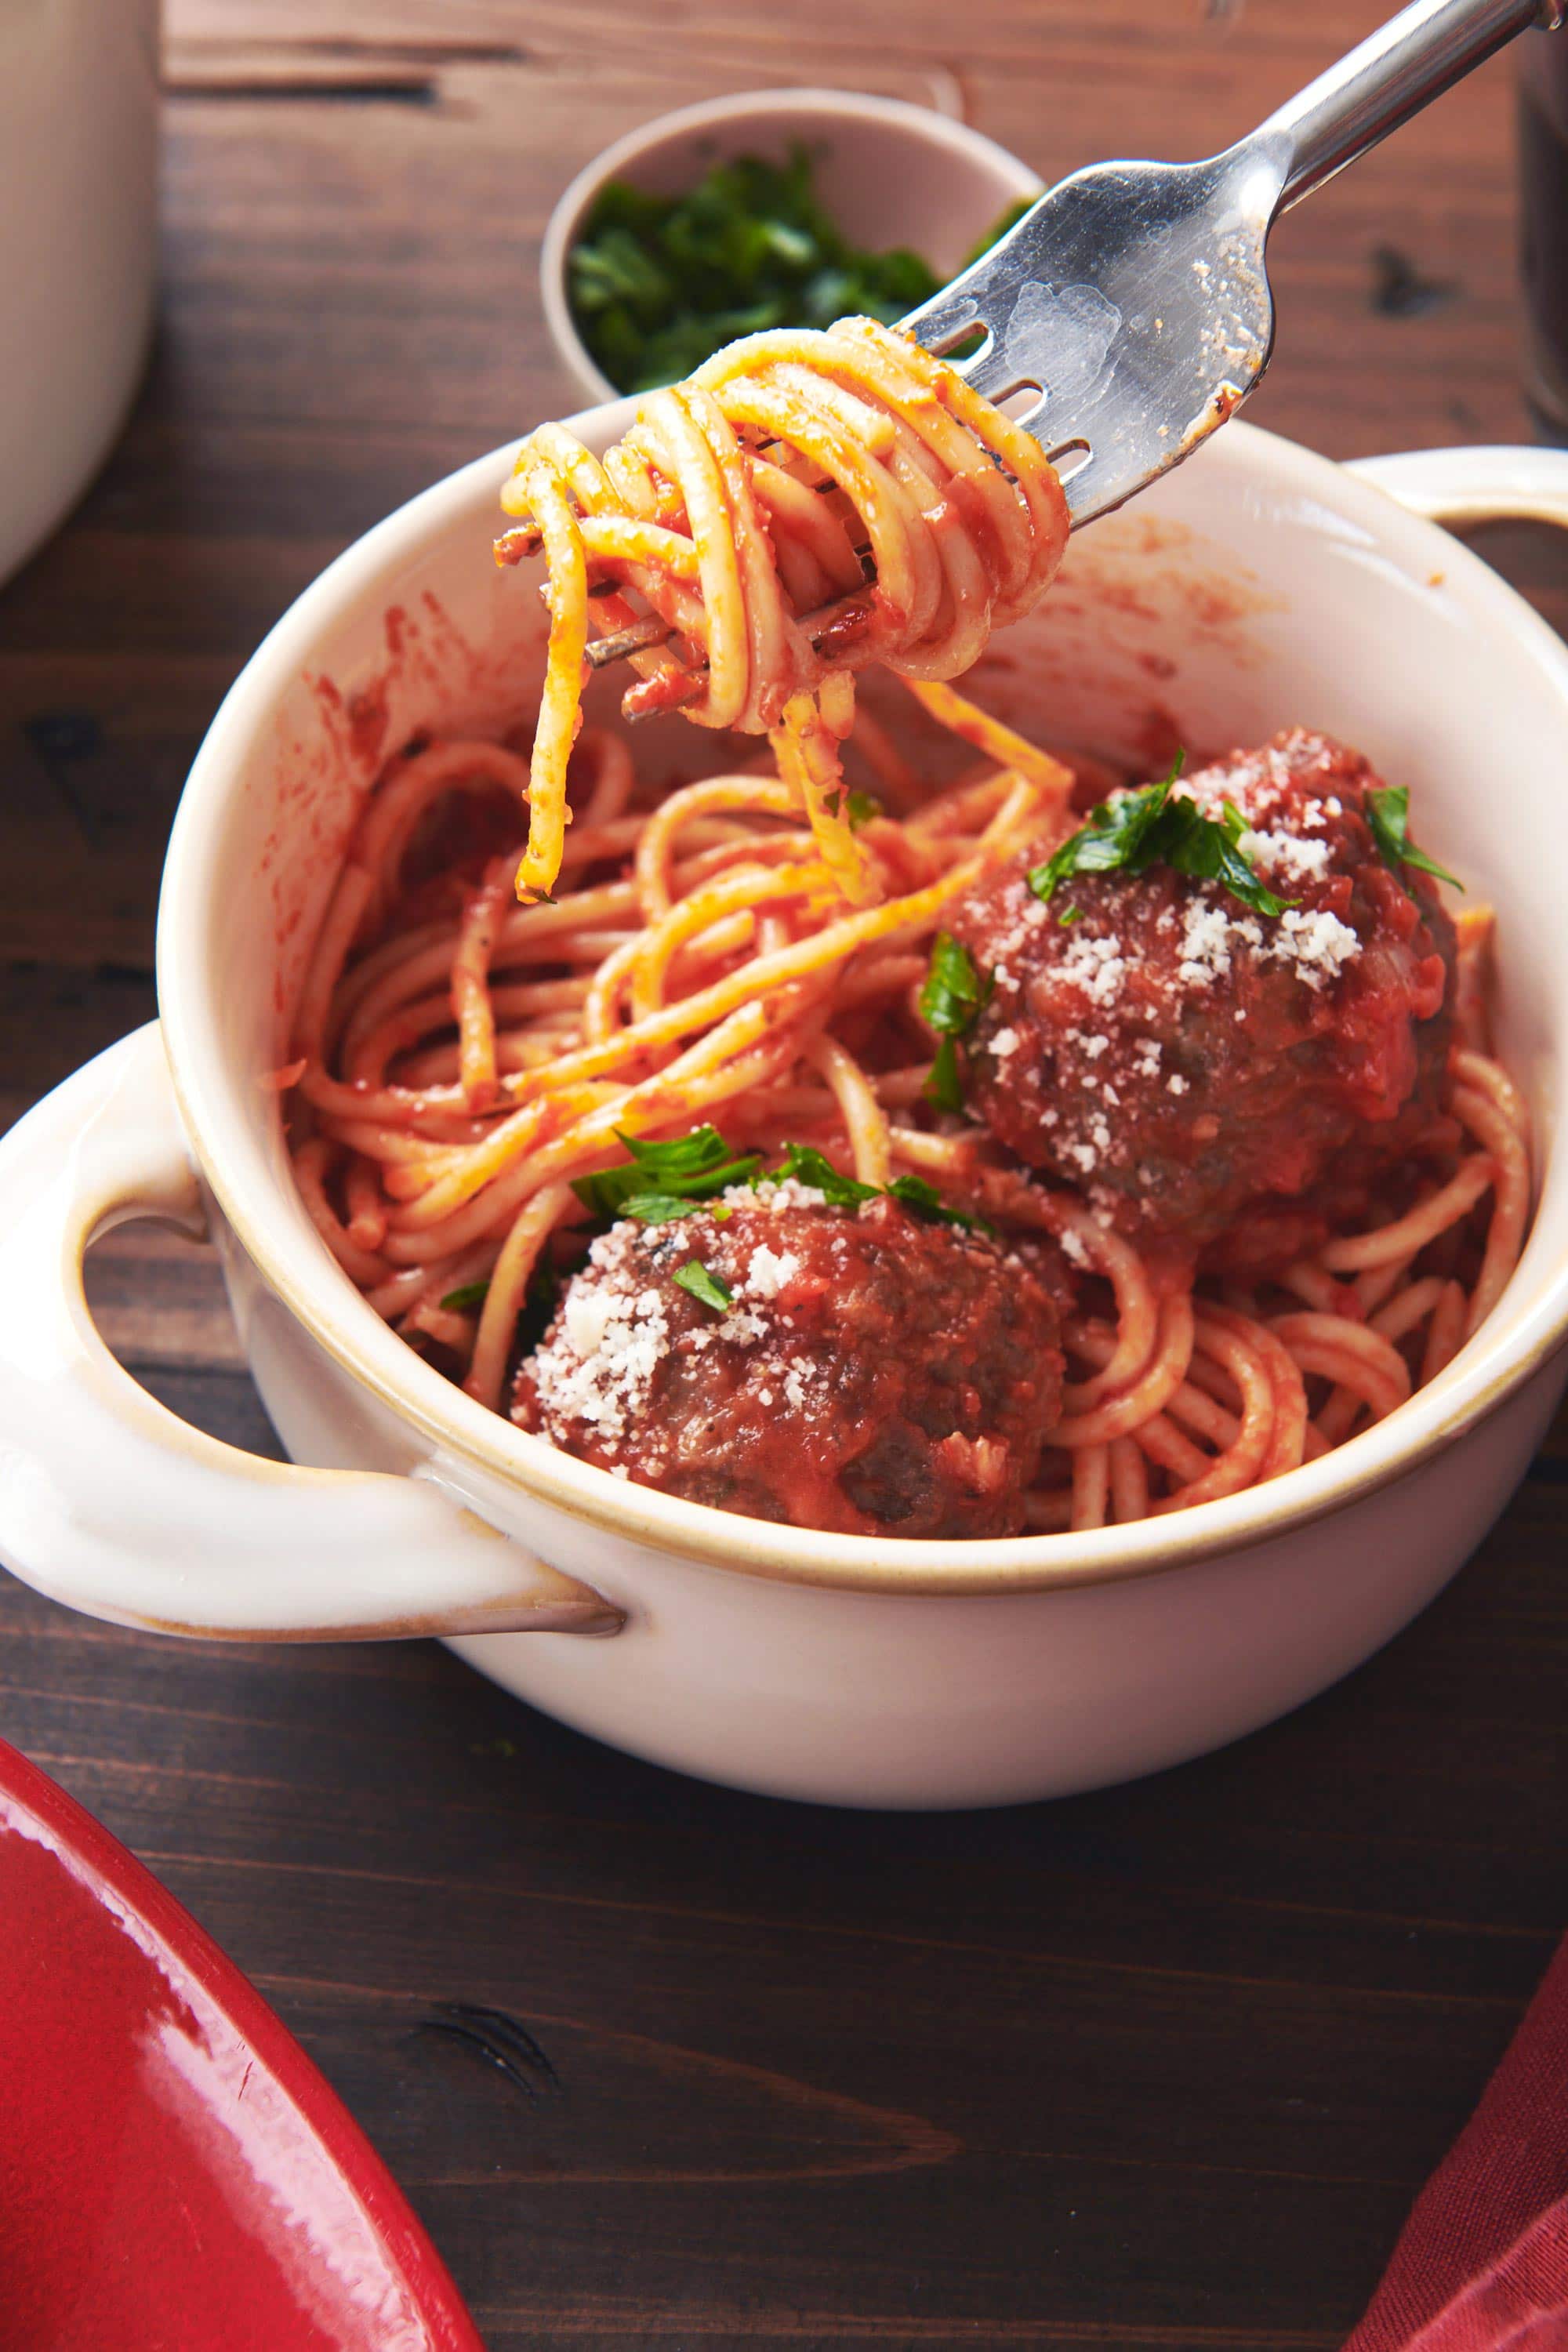 Spaghetti and Meatballs with Tomato Sauce